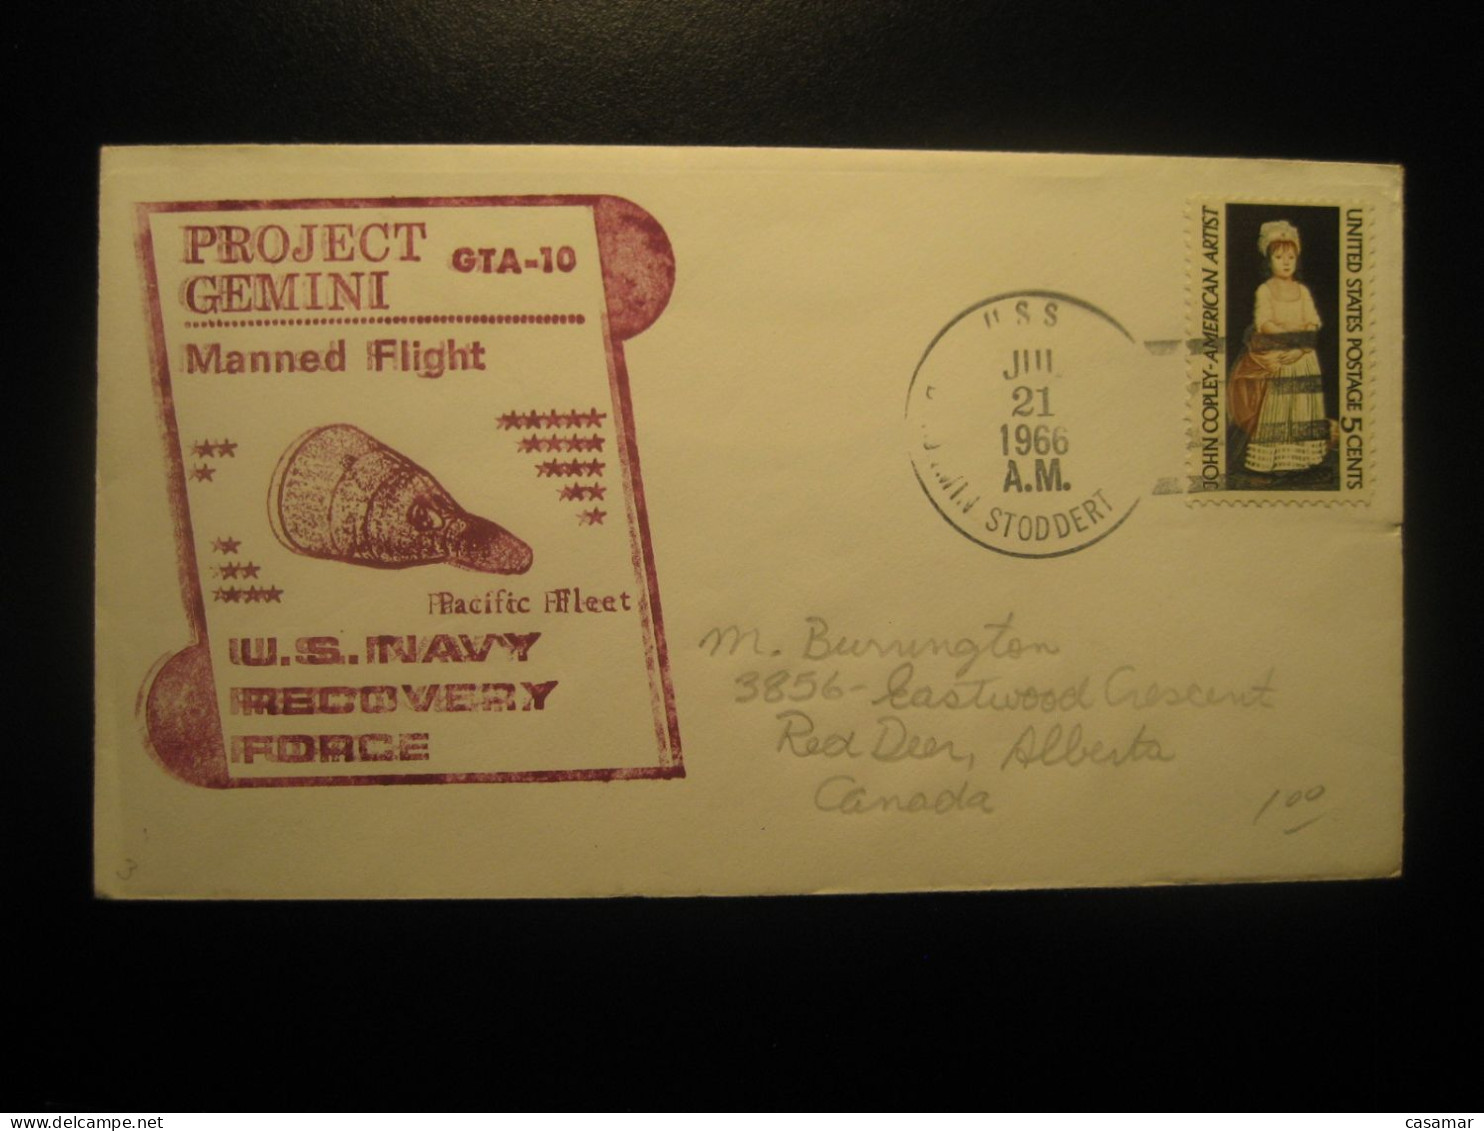 PROJECT GEMINI Pacific Fleet GTA10 Manned Flight US Navy Recovery Force USS STODDERT 1966 Cancel Cover USA Space Spatial - Etats-Unis